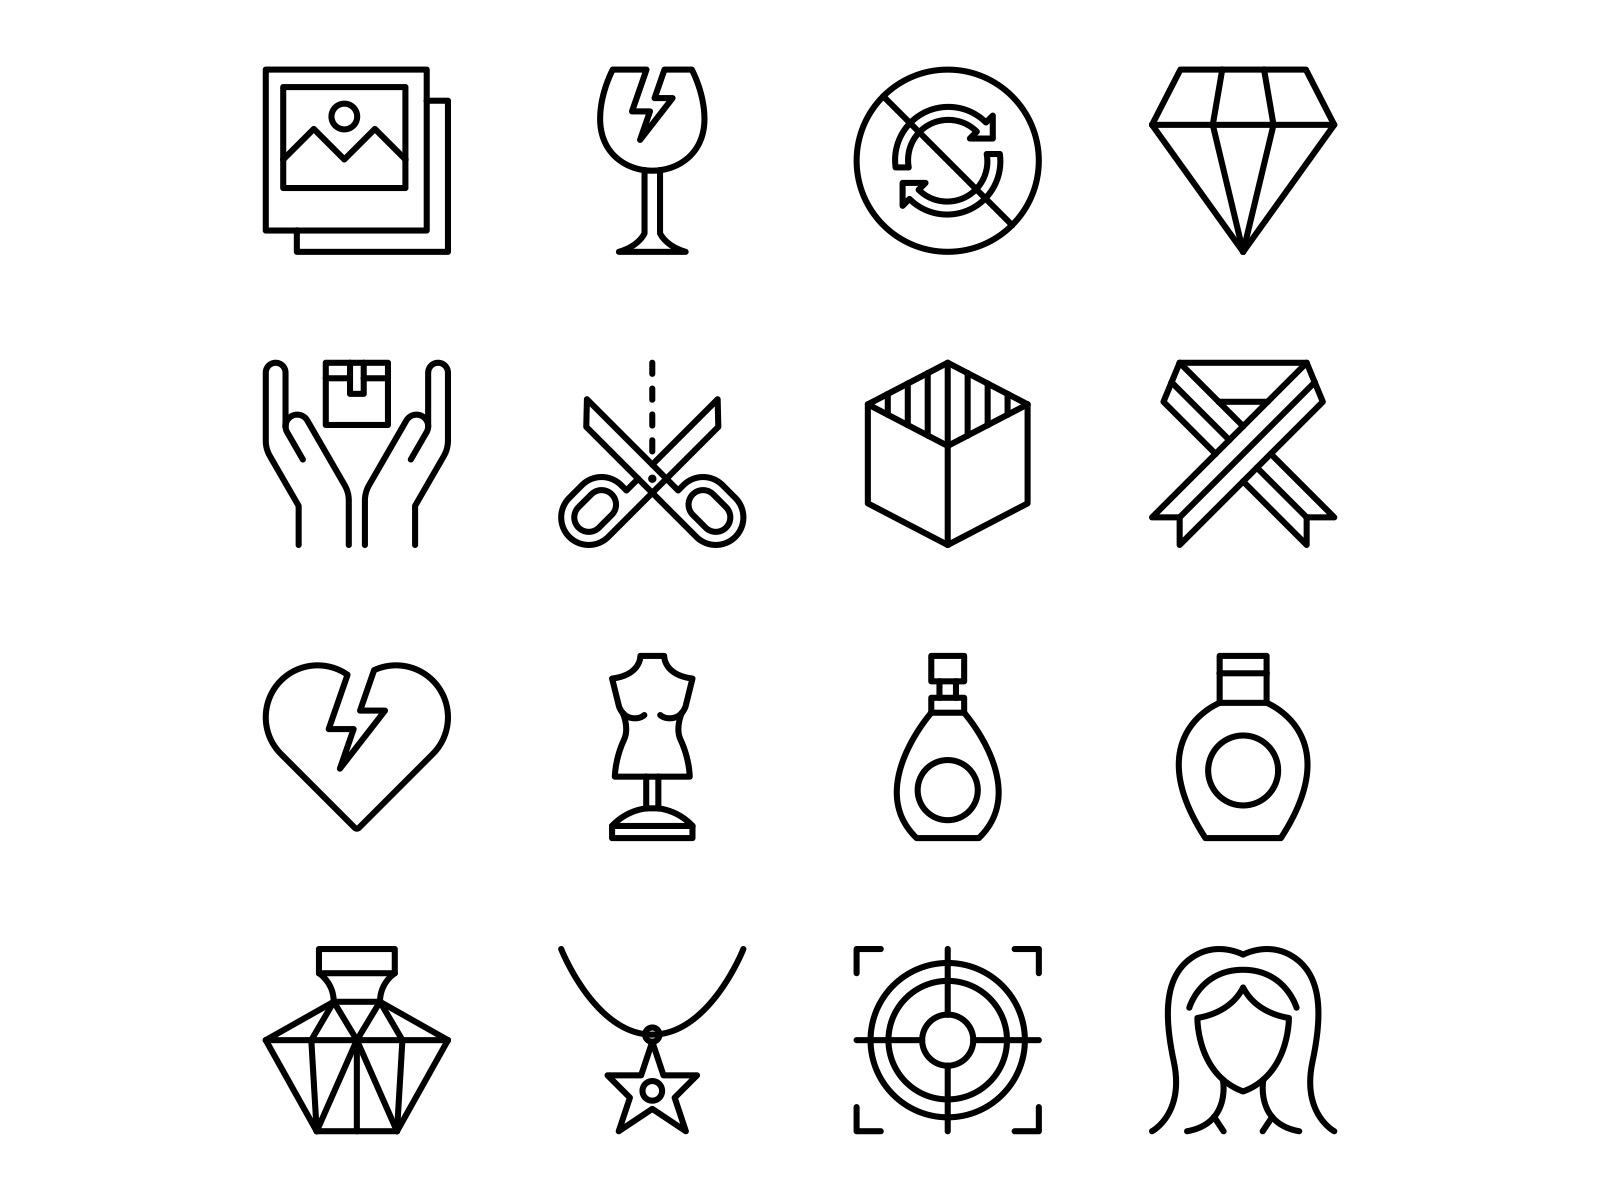 Free Objects Icon Set by Unblast on Dribbble